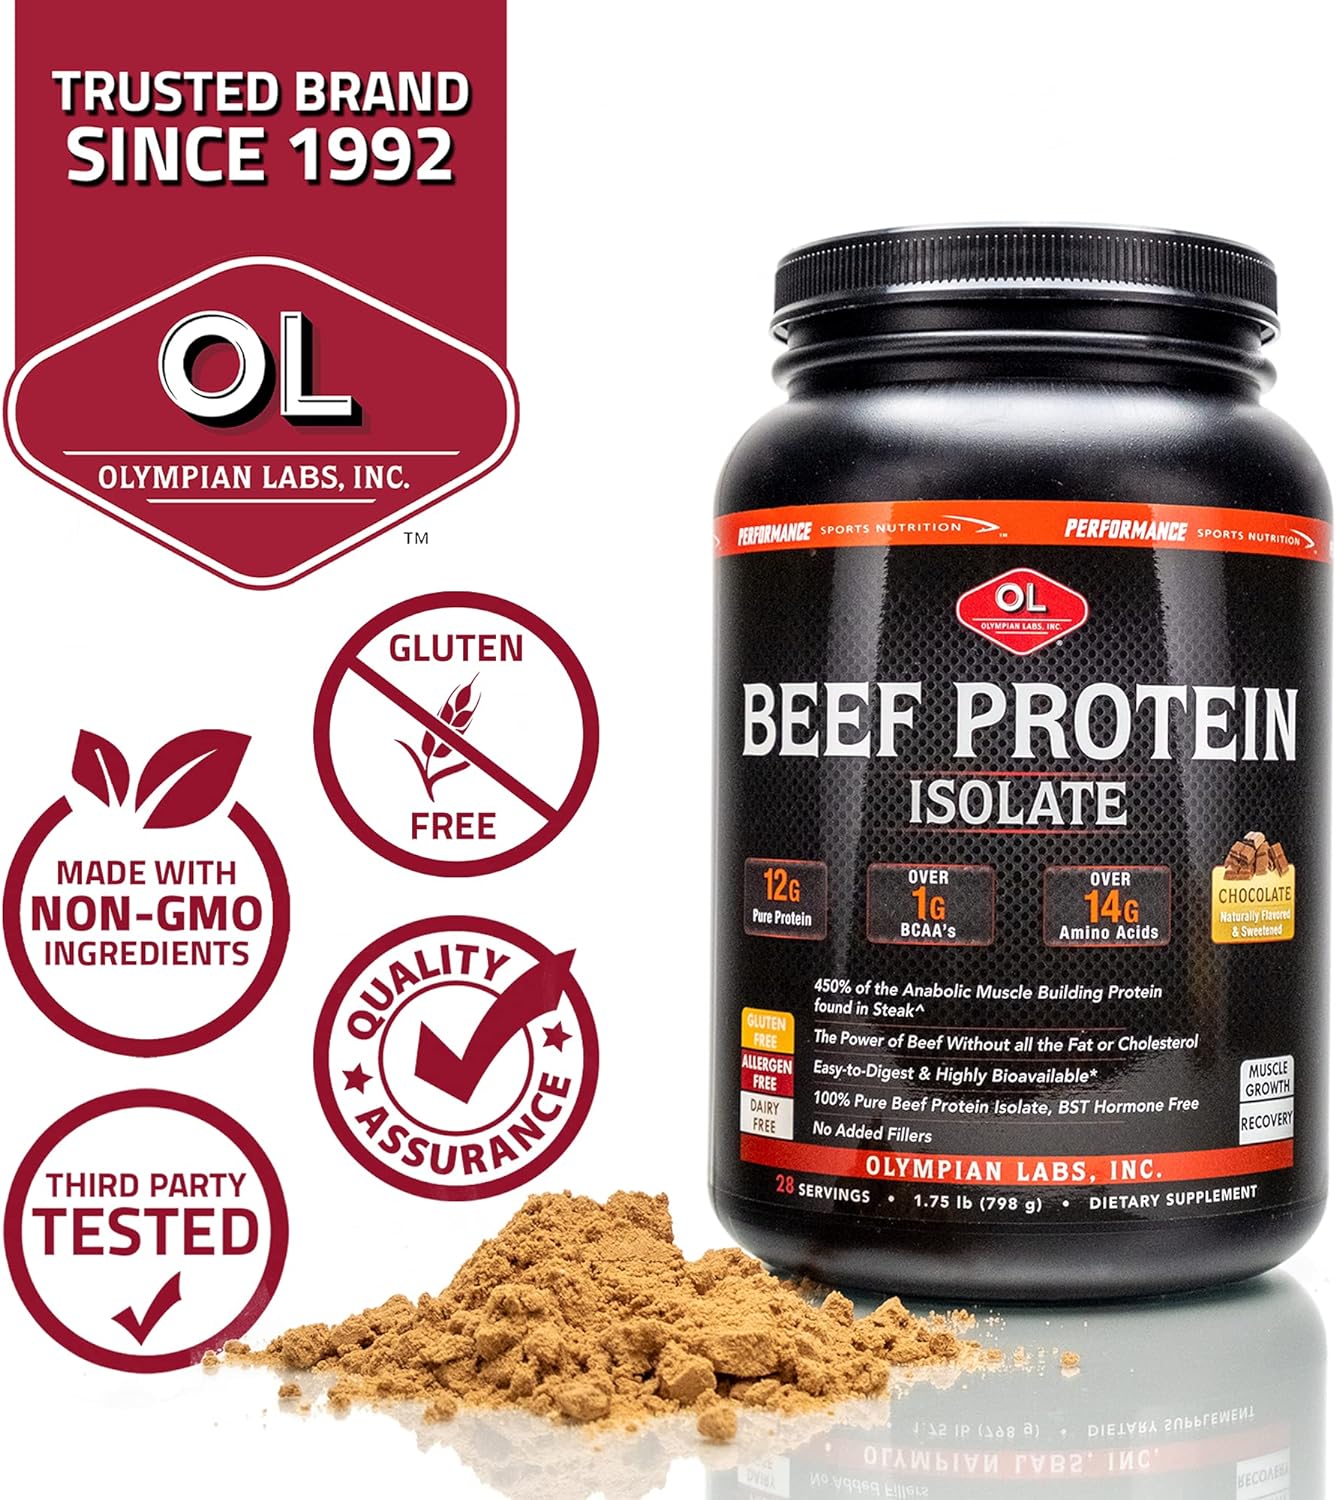 Olympian Labs Beef Protein Isolate, 24g Protein, BST Free, Macro-Micro